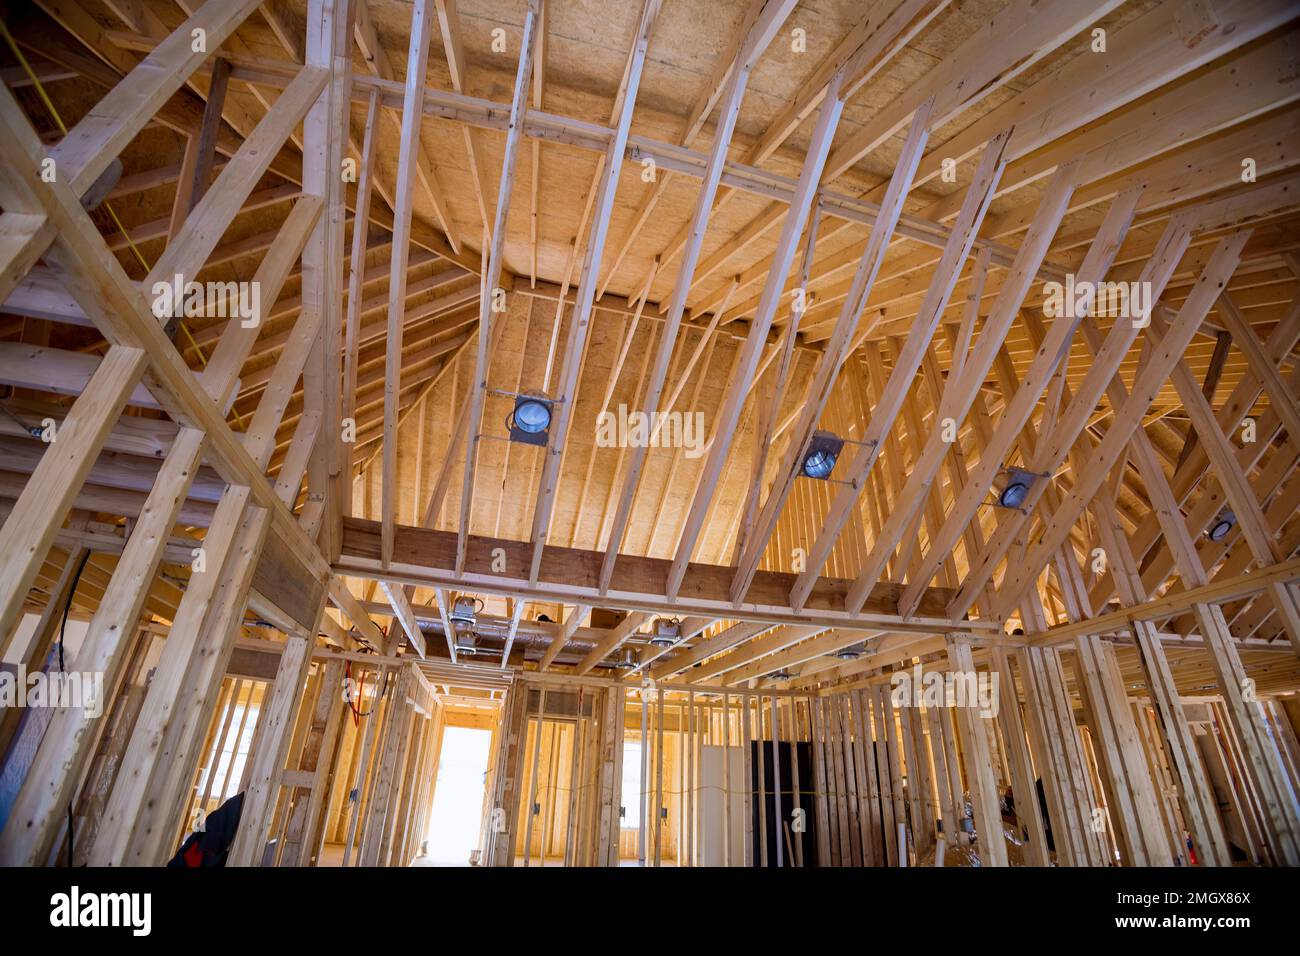 Frame system for new house under construction, structure truss beams frames system newly built framing Stock Photo